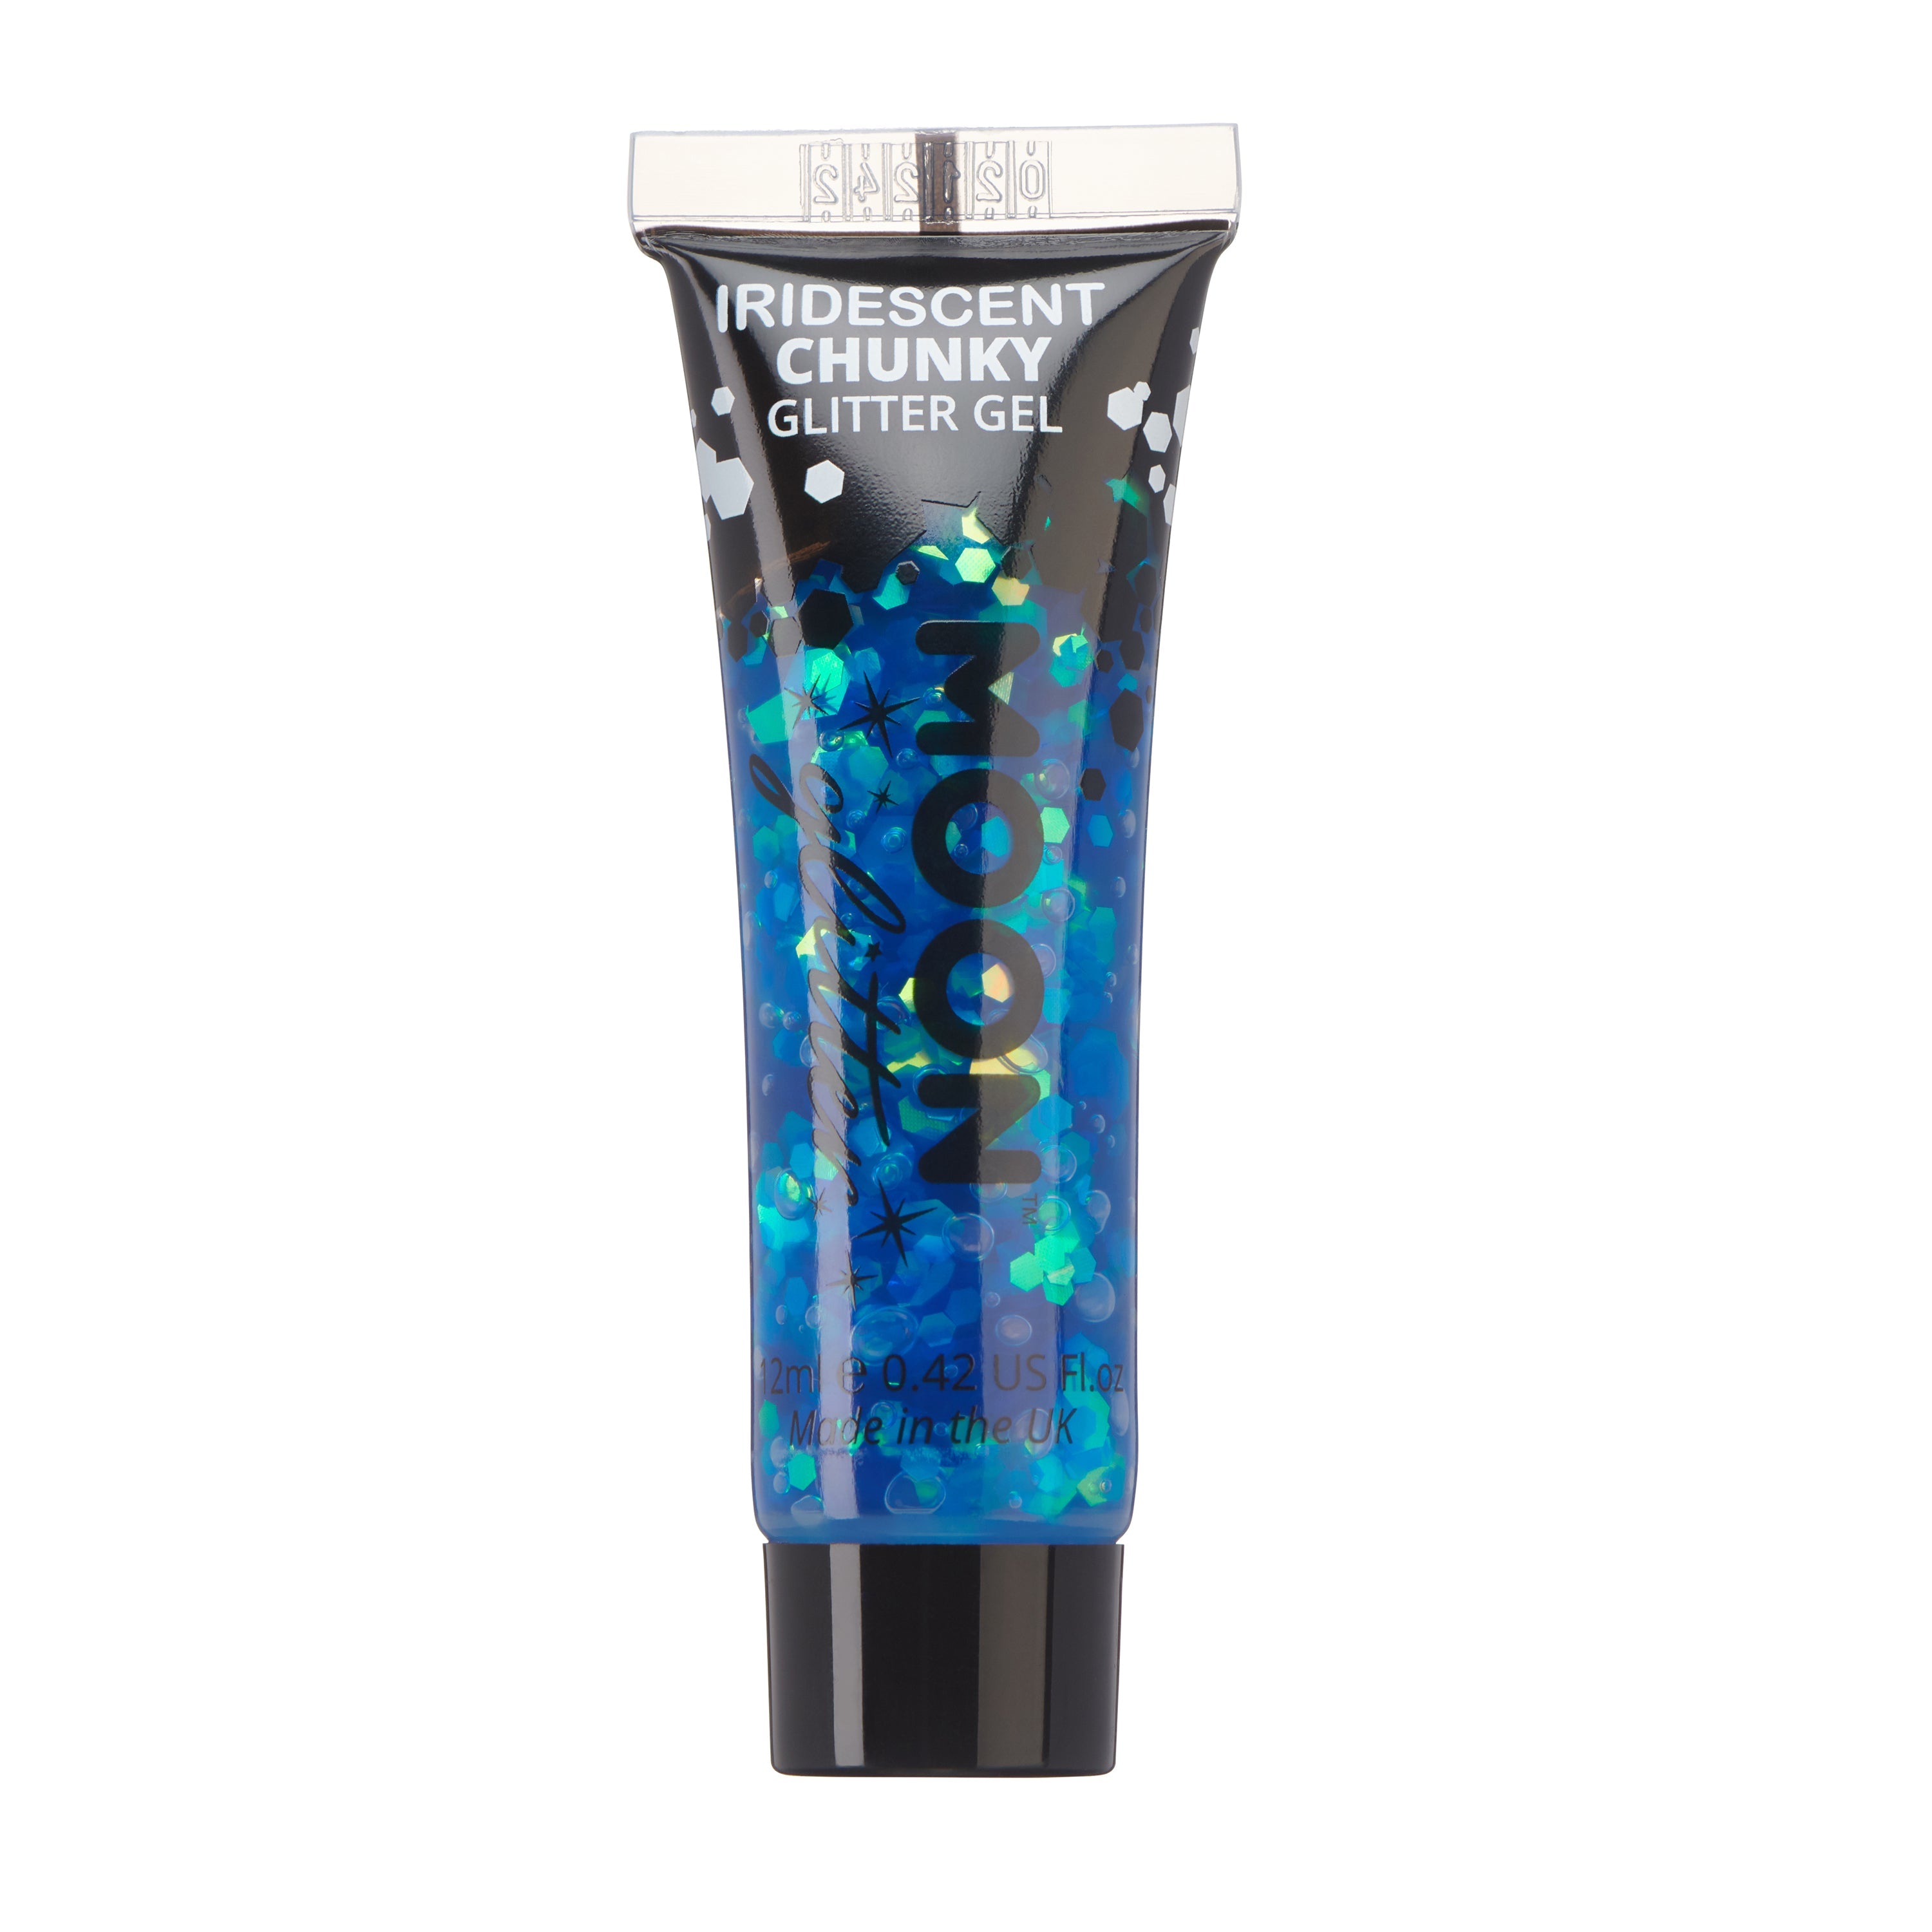 Blue - Iridescent Chunky Face & Body Glitter Gel, 12mL. Cosmetically certified, FDA & Health Canada compliant, cruelty free and vegan.